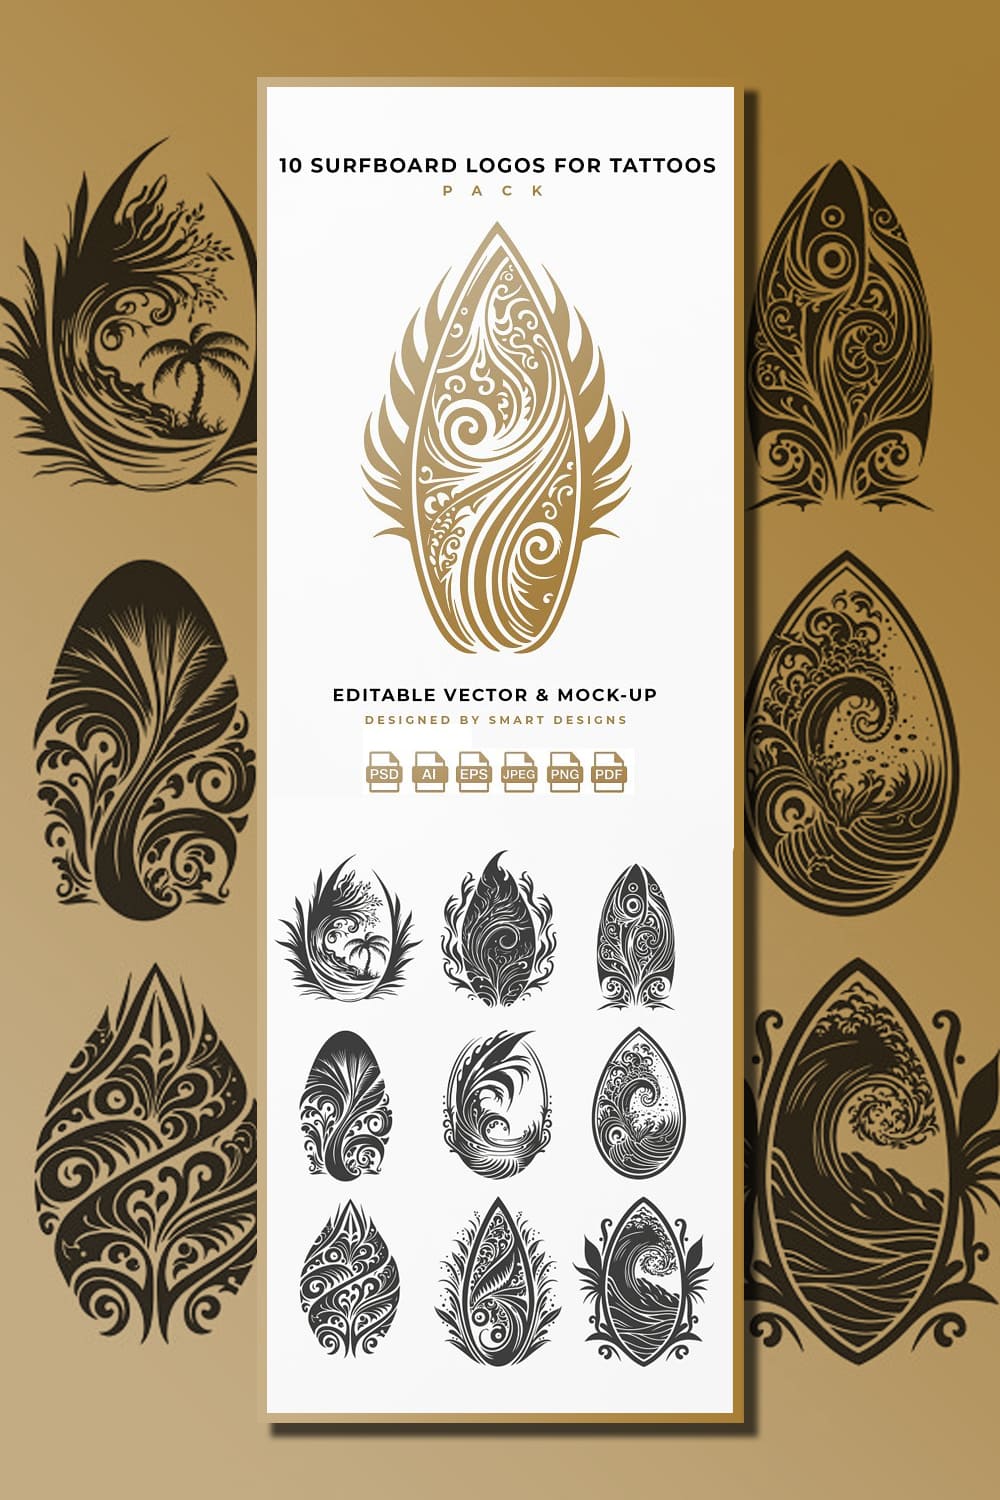 Surfboard Logos for Tattoos Pack x10 pinterest image preview.